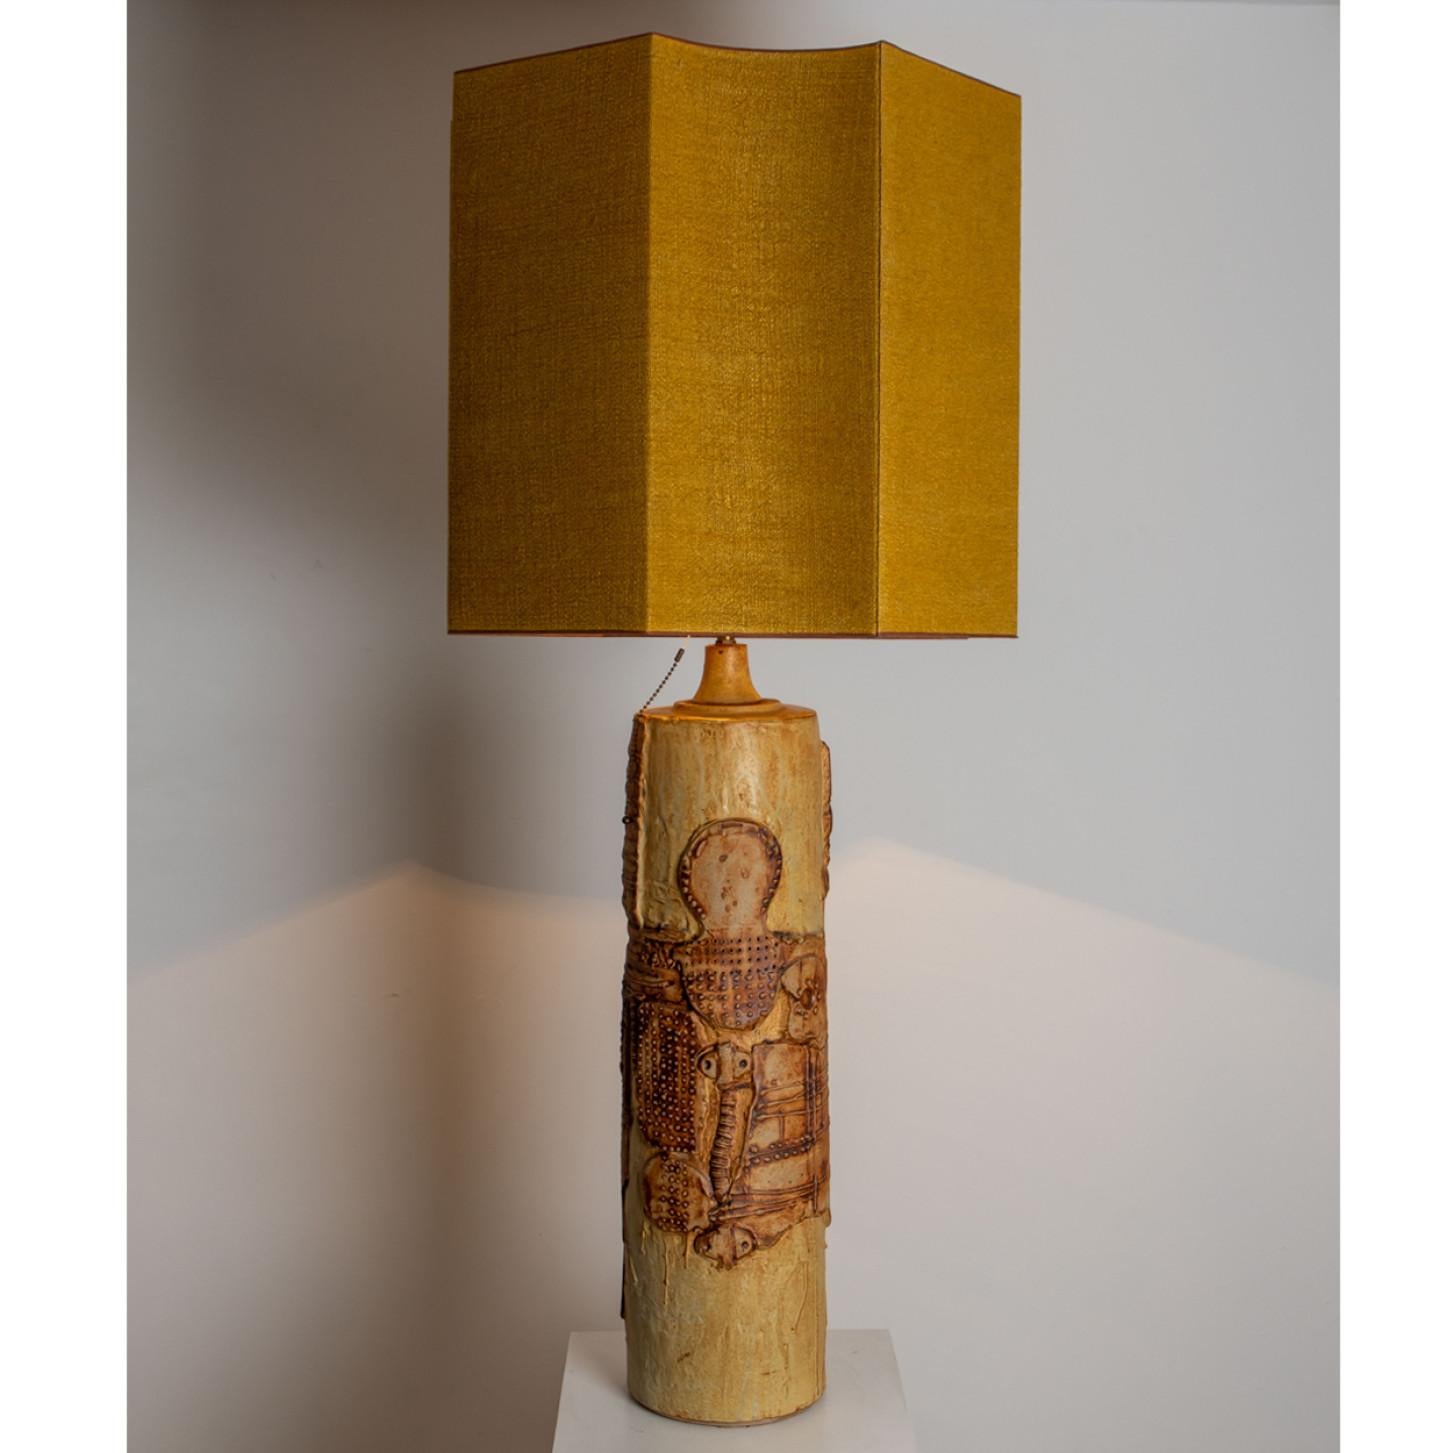 Large B. Rooke Ceramic Lamp, 1960s with Custom Made Silk Lampshade by René Hoube For Sale 6